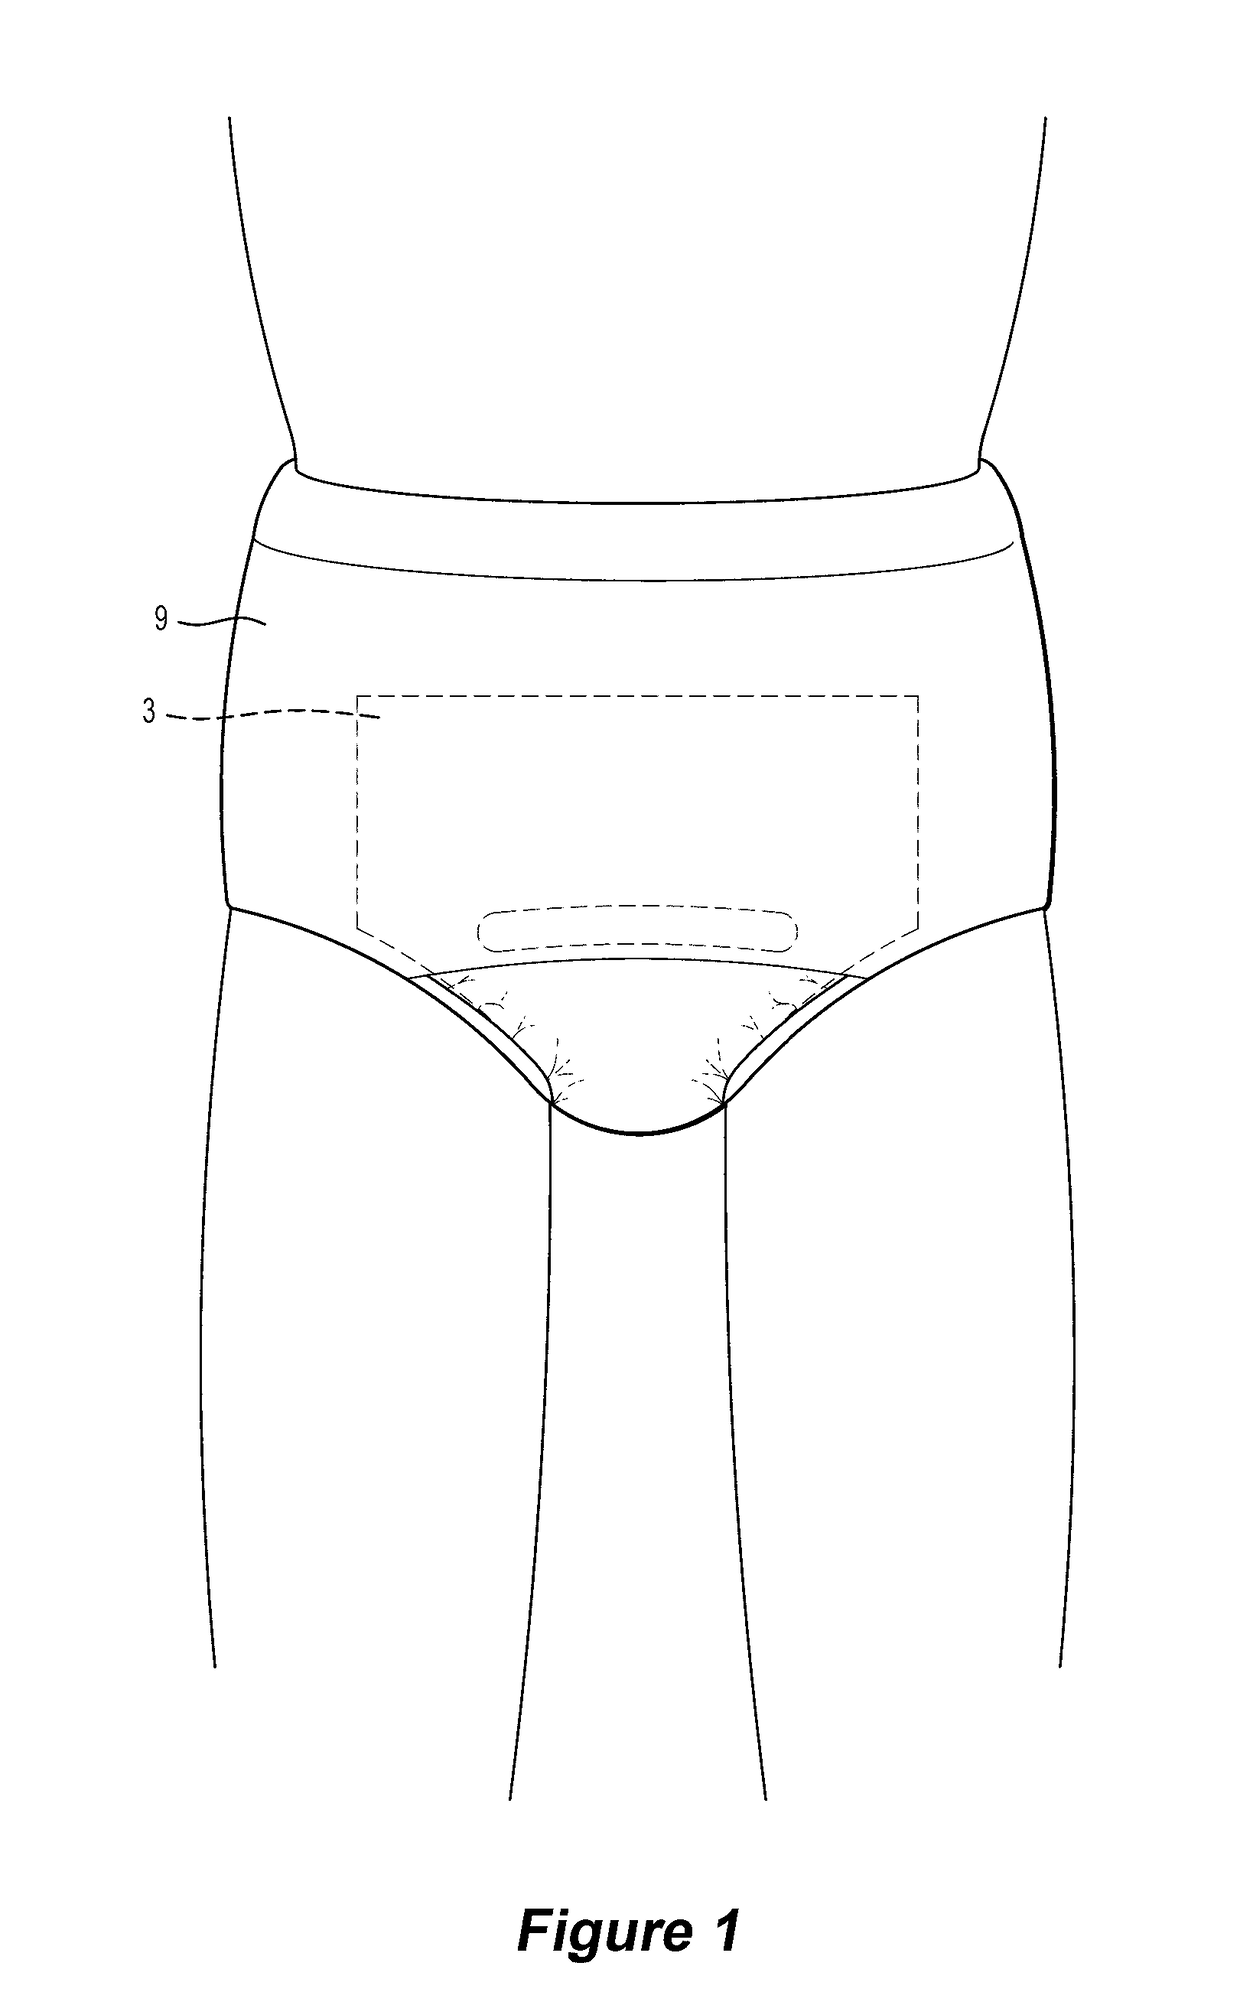 Incontinence product